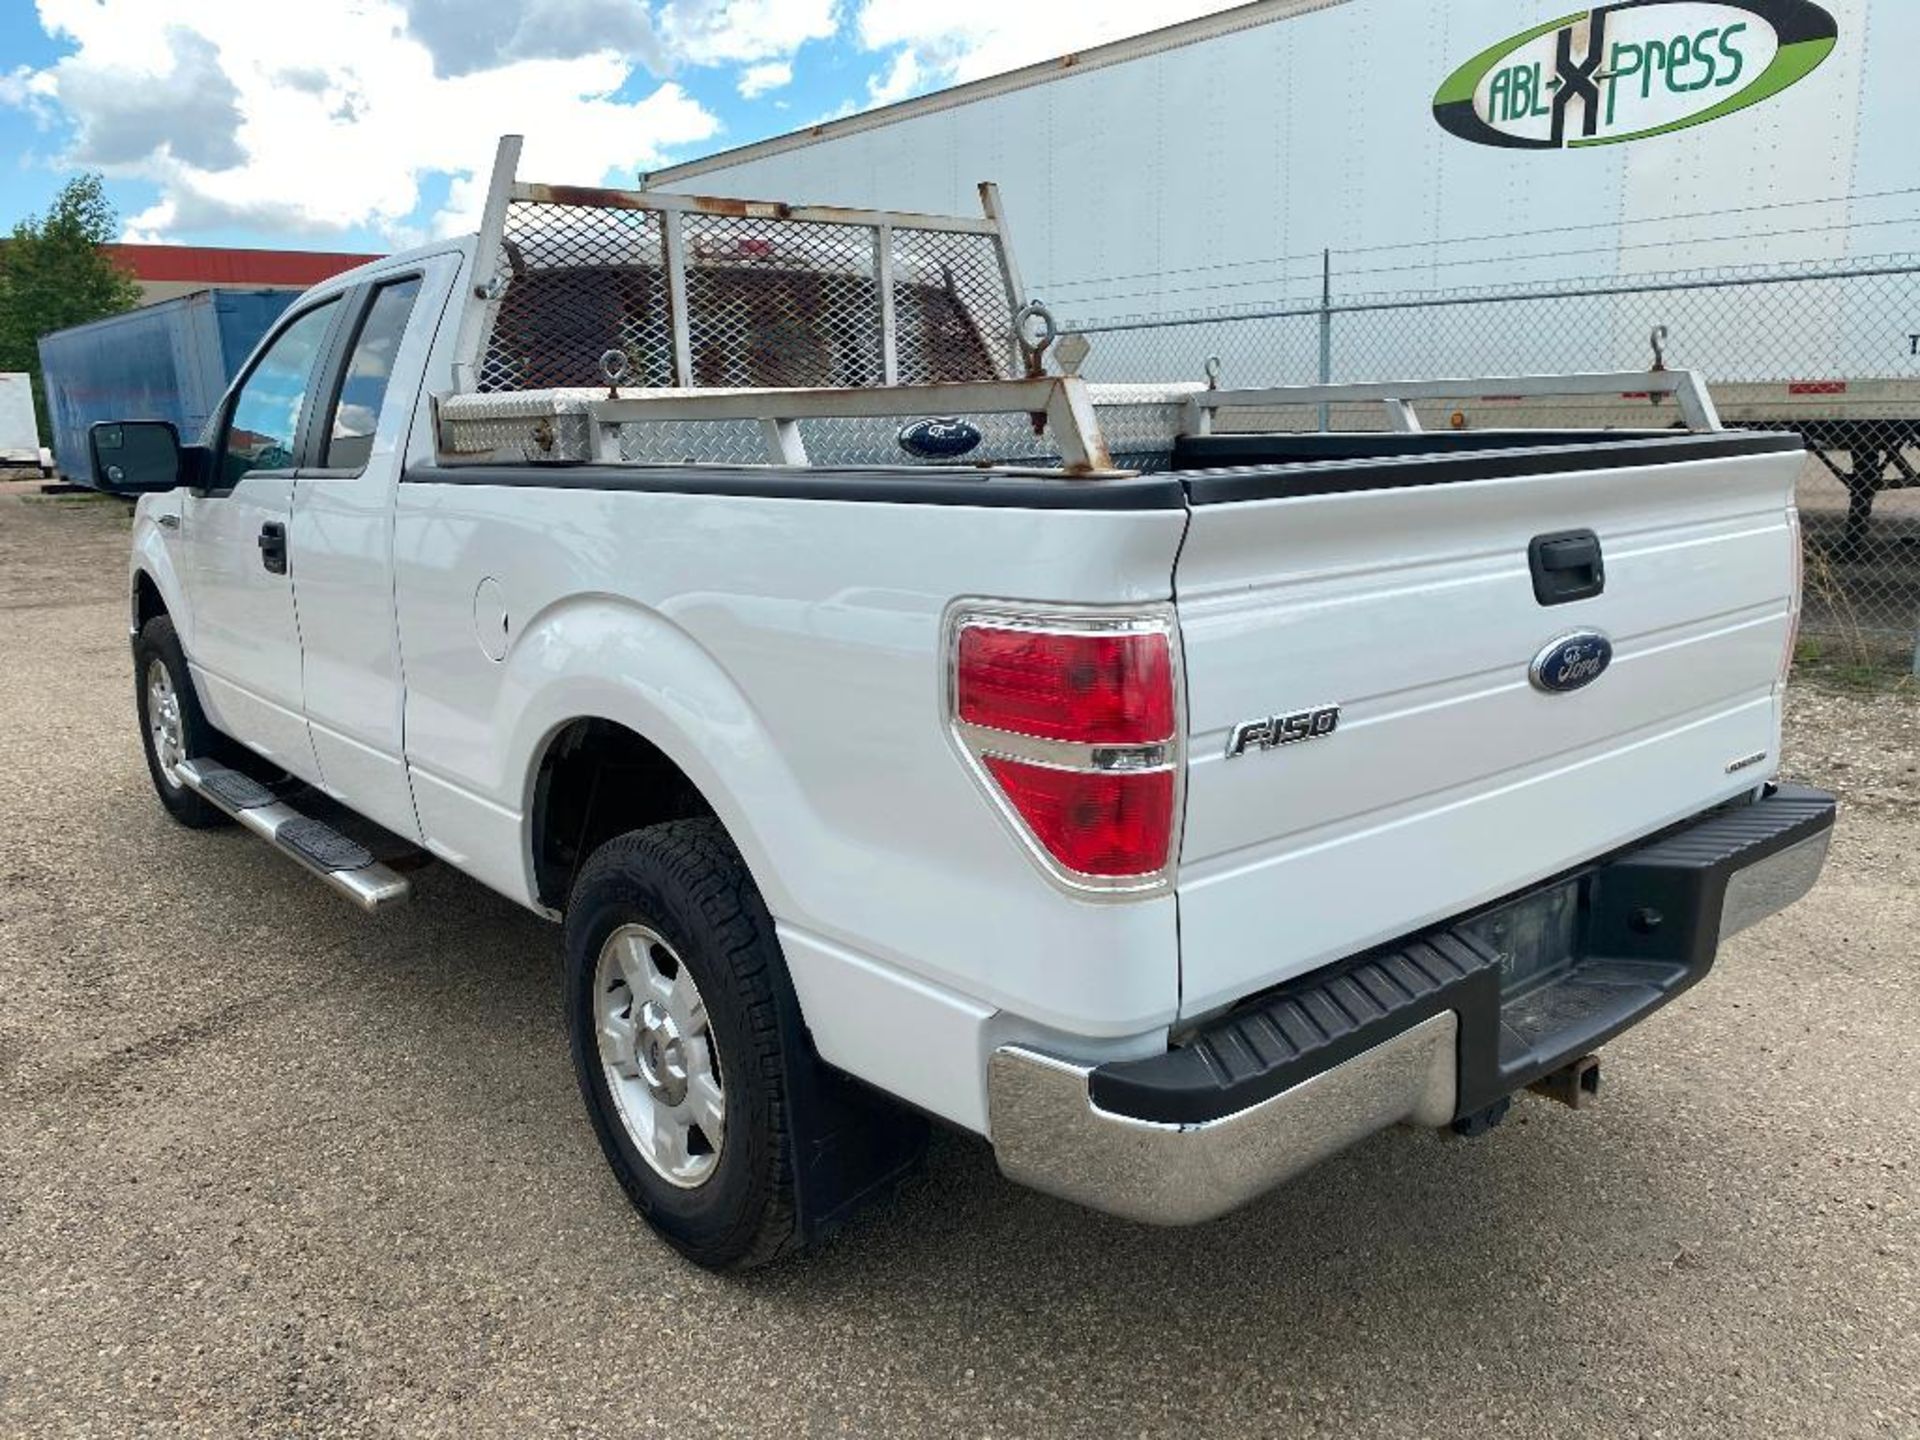 2013 Ford F-150 SuperCab XLT 4X4 Pickup Truck VIN #: 1FTFX1EF0DFD05140 - Image 4 of 12